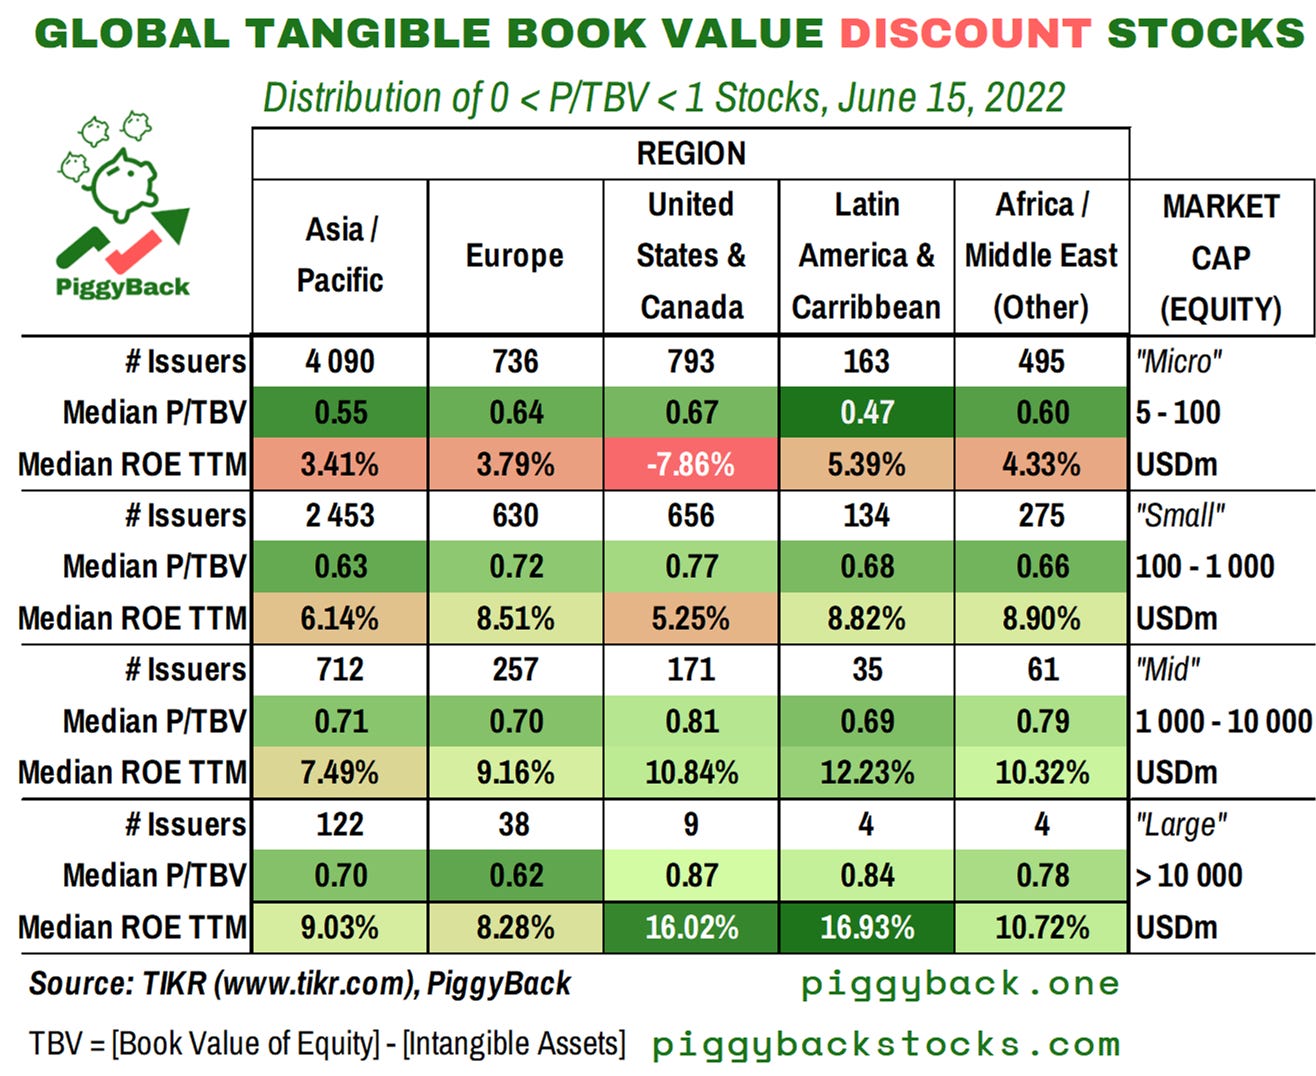 Table 4. A global tangible book value of equity discount screen (0 < P/TBV < 1) as of June 15, 2022 (intraday). Sub-sets are filtered by region and market capitalization of equity, excluding below 5 USD million market capitalization. Source: TIKR (screening data), PiggyBack (summary)